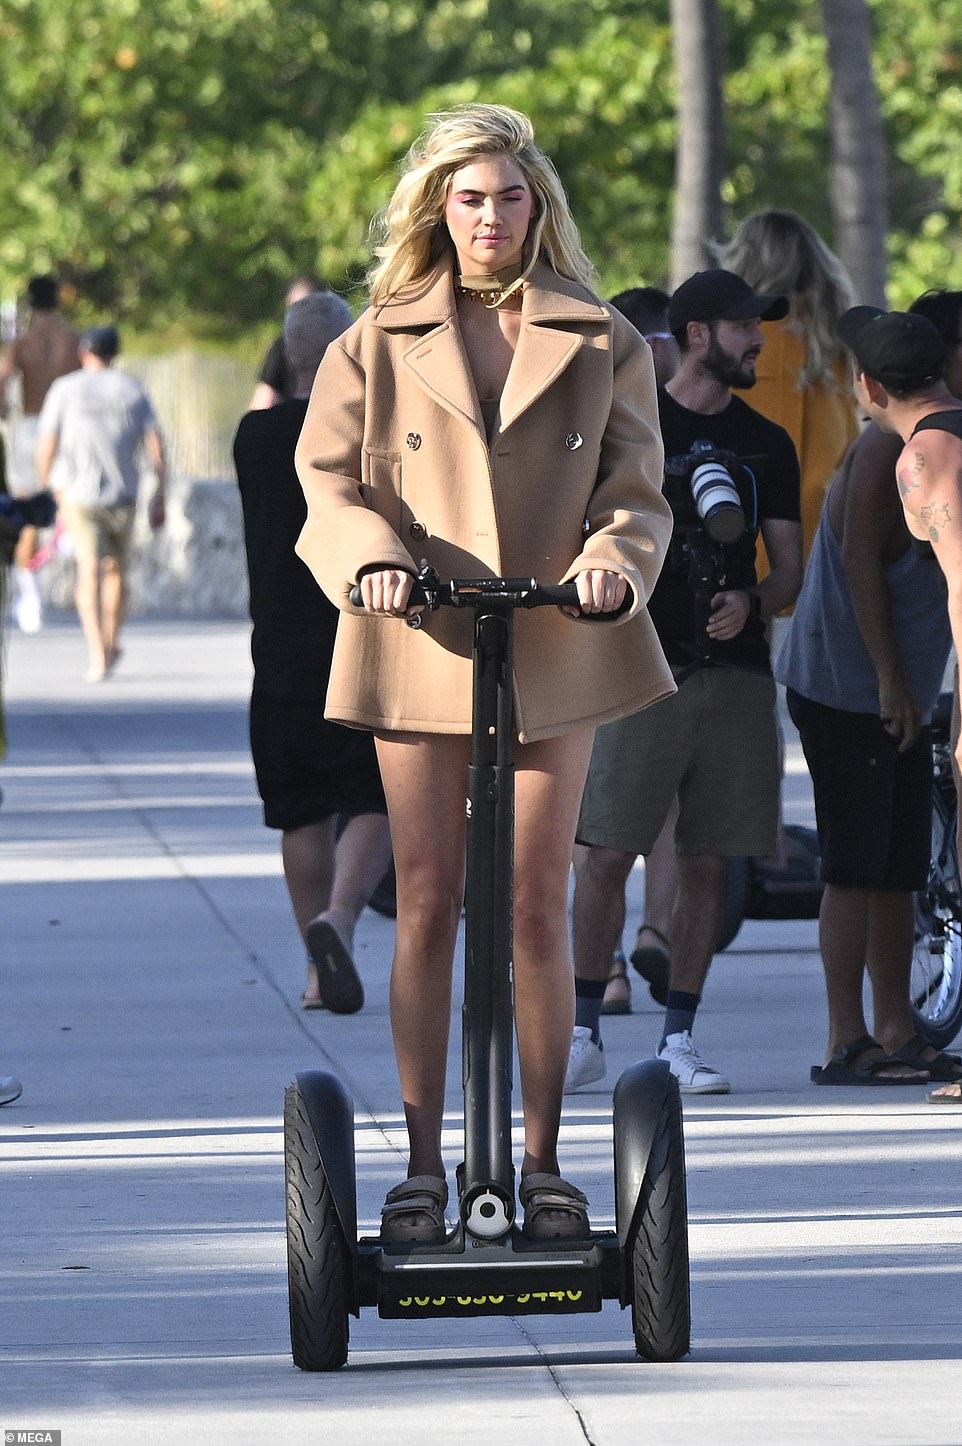 Kate was riding the Segway while wearing $1,050 Prada sandals – the padded nappa leather sandals.